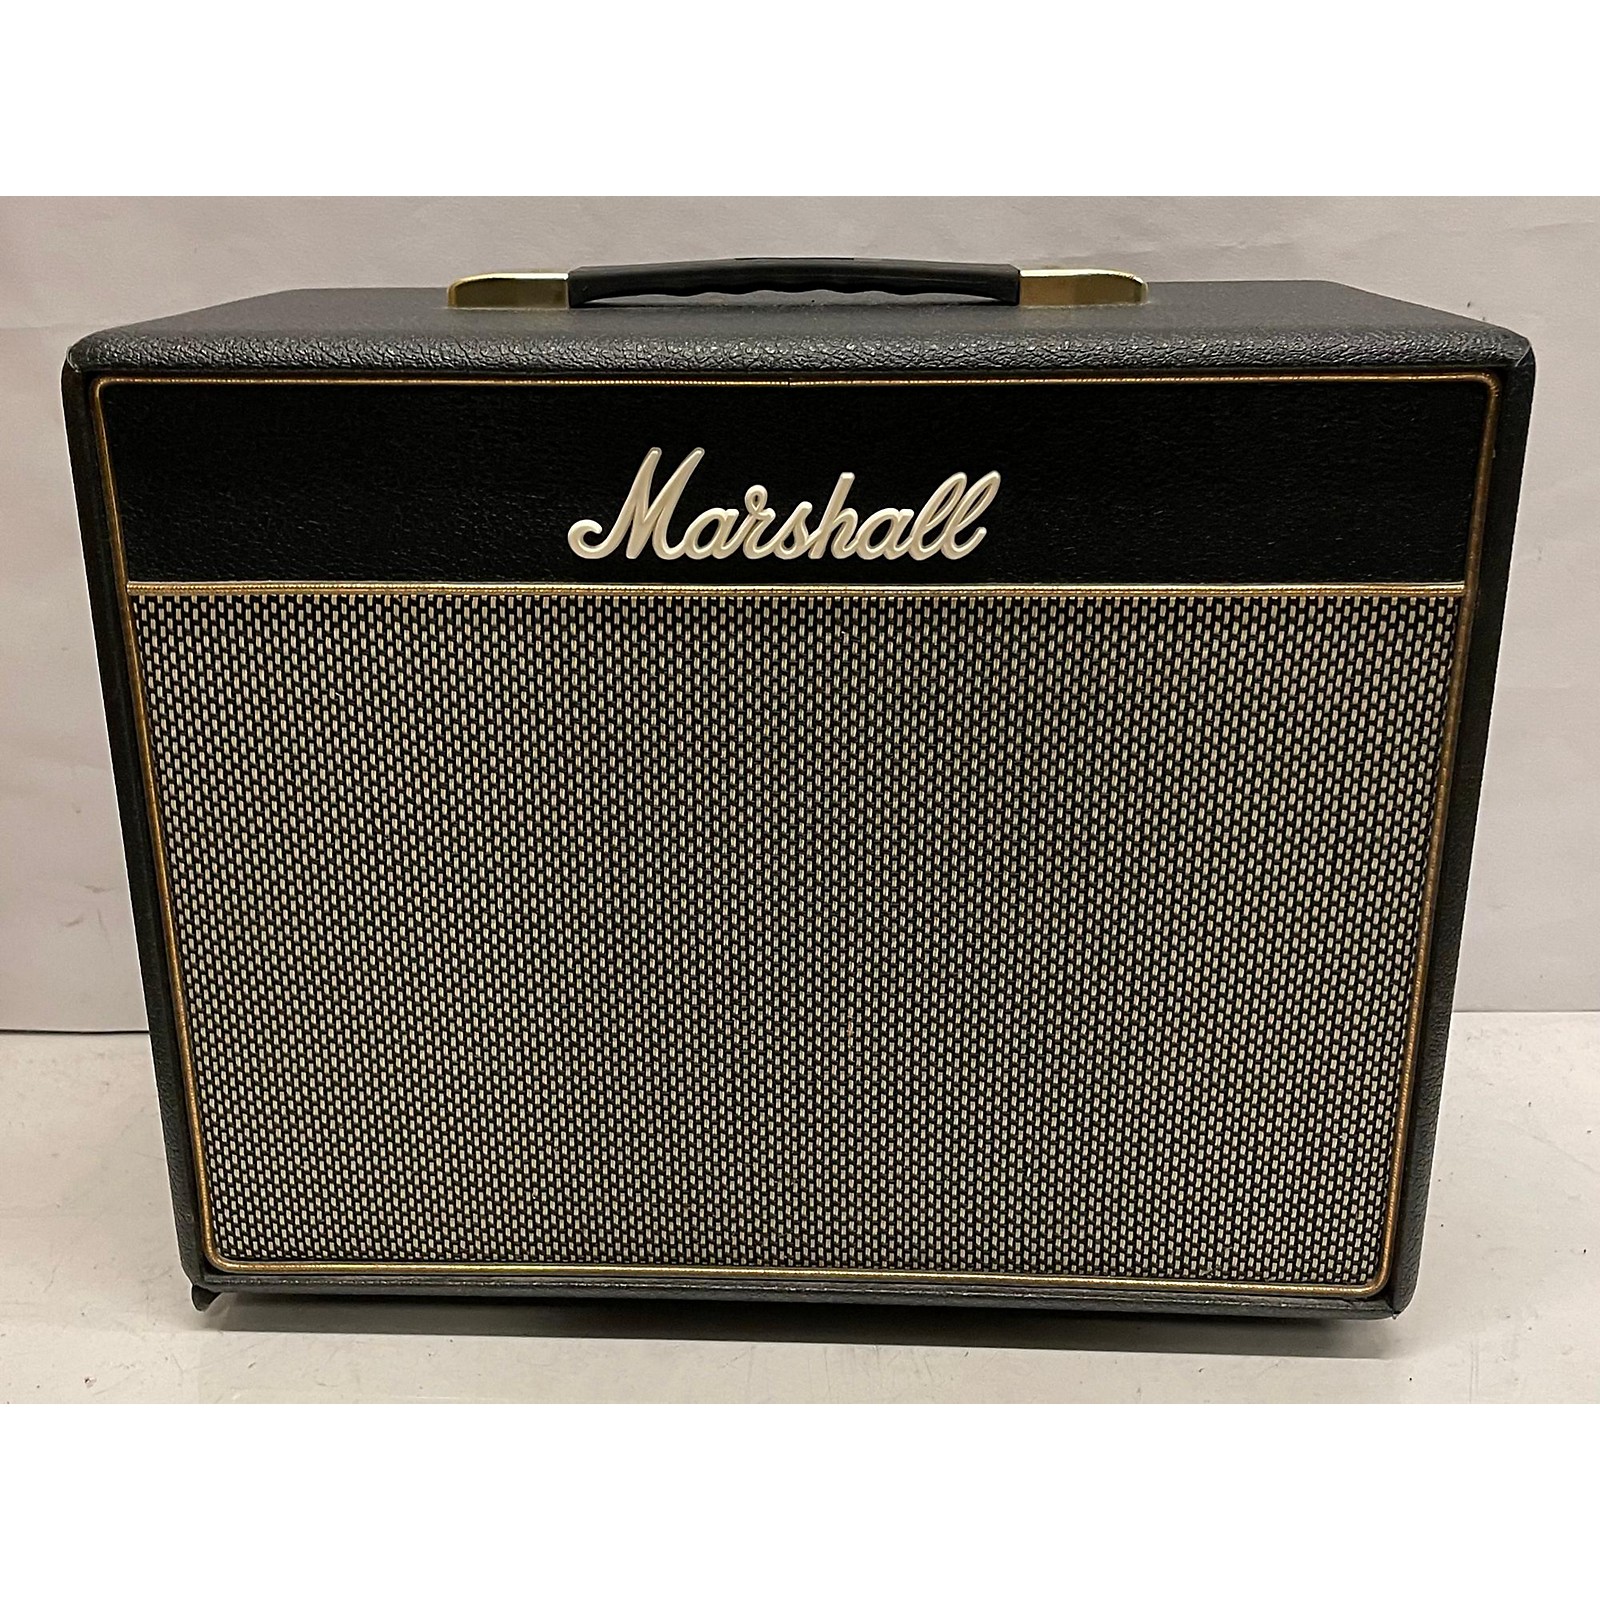 Used Marshall C110 Class 5 1x10 Guitar Cabinet | Guitar Center